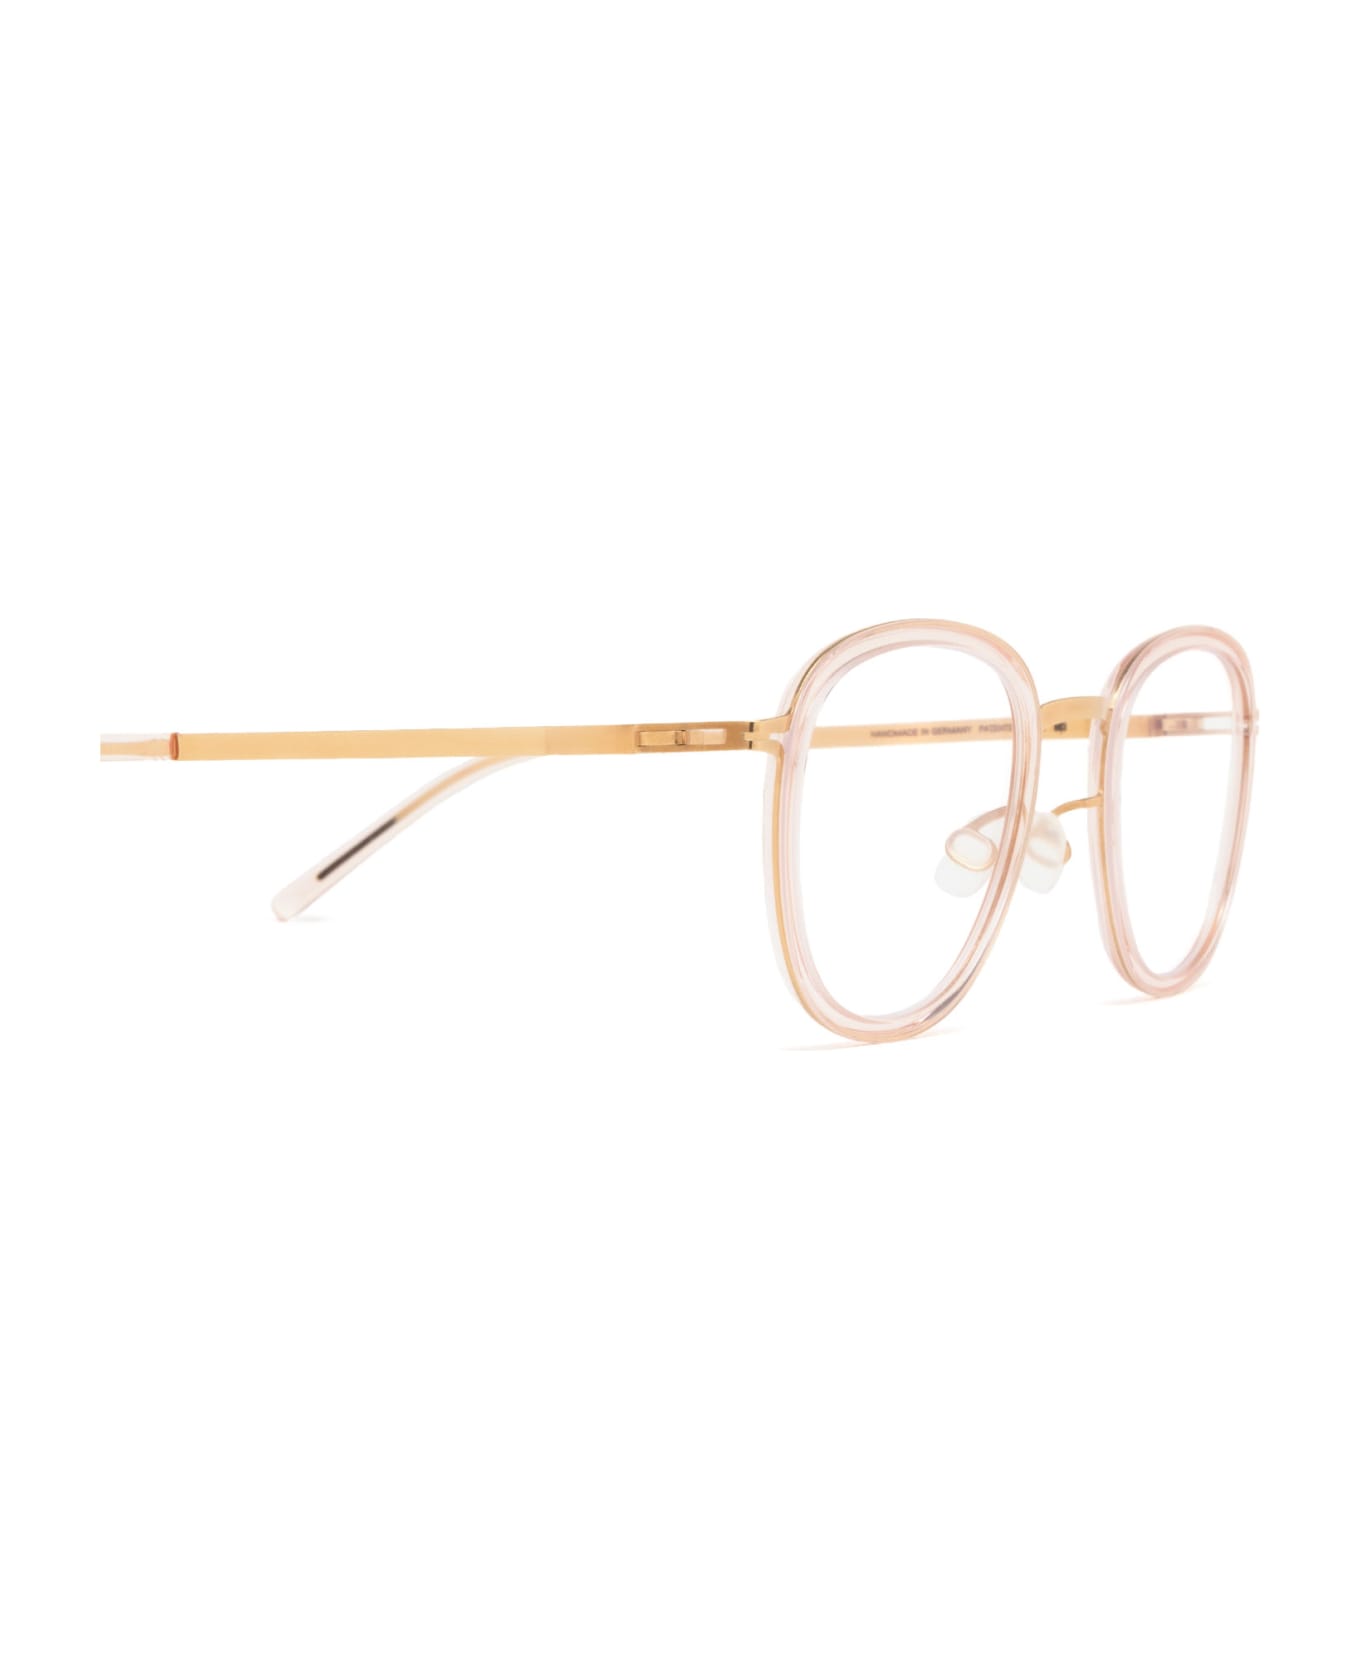 Mykita Helmi A27-champagne Gold/rose Water Glasses - A27-Champagne Gold/Rose Water